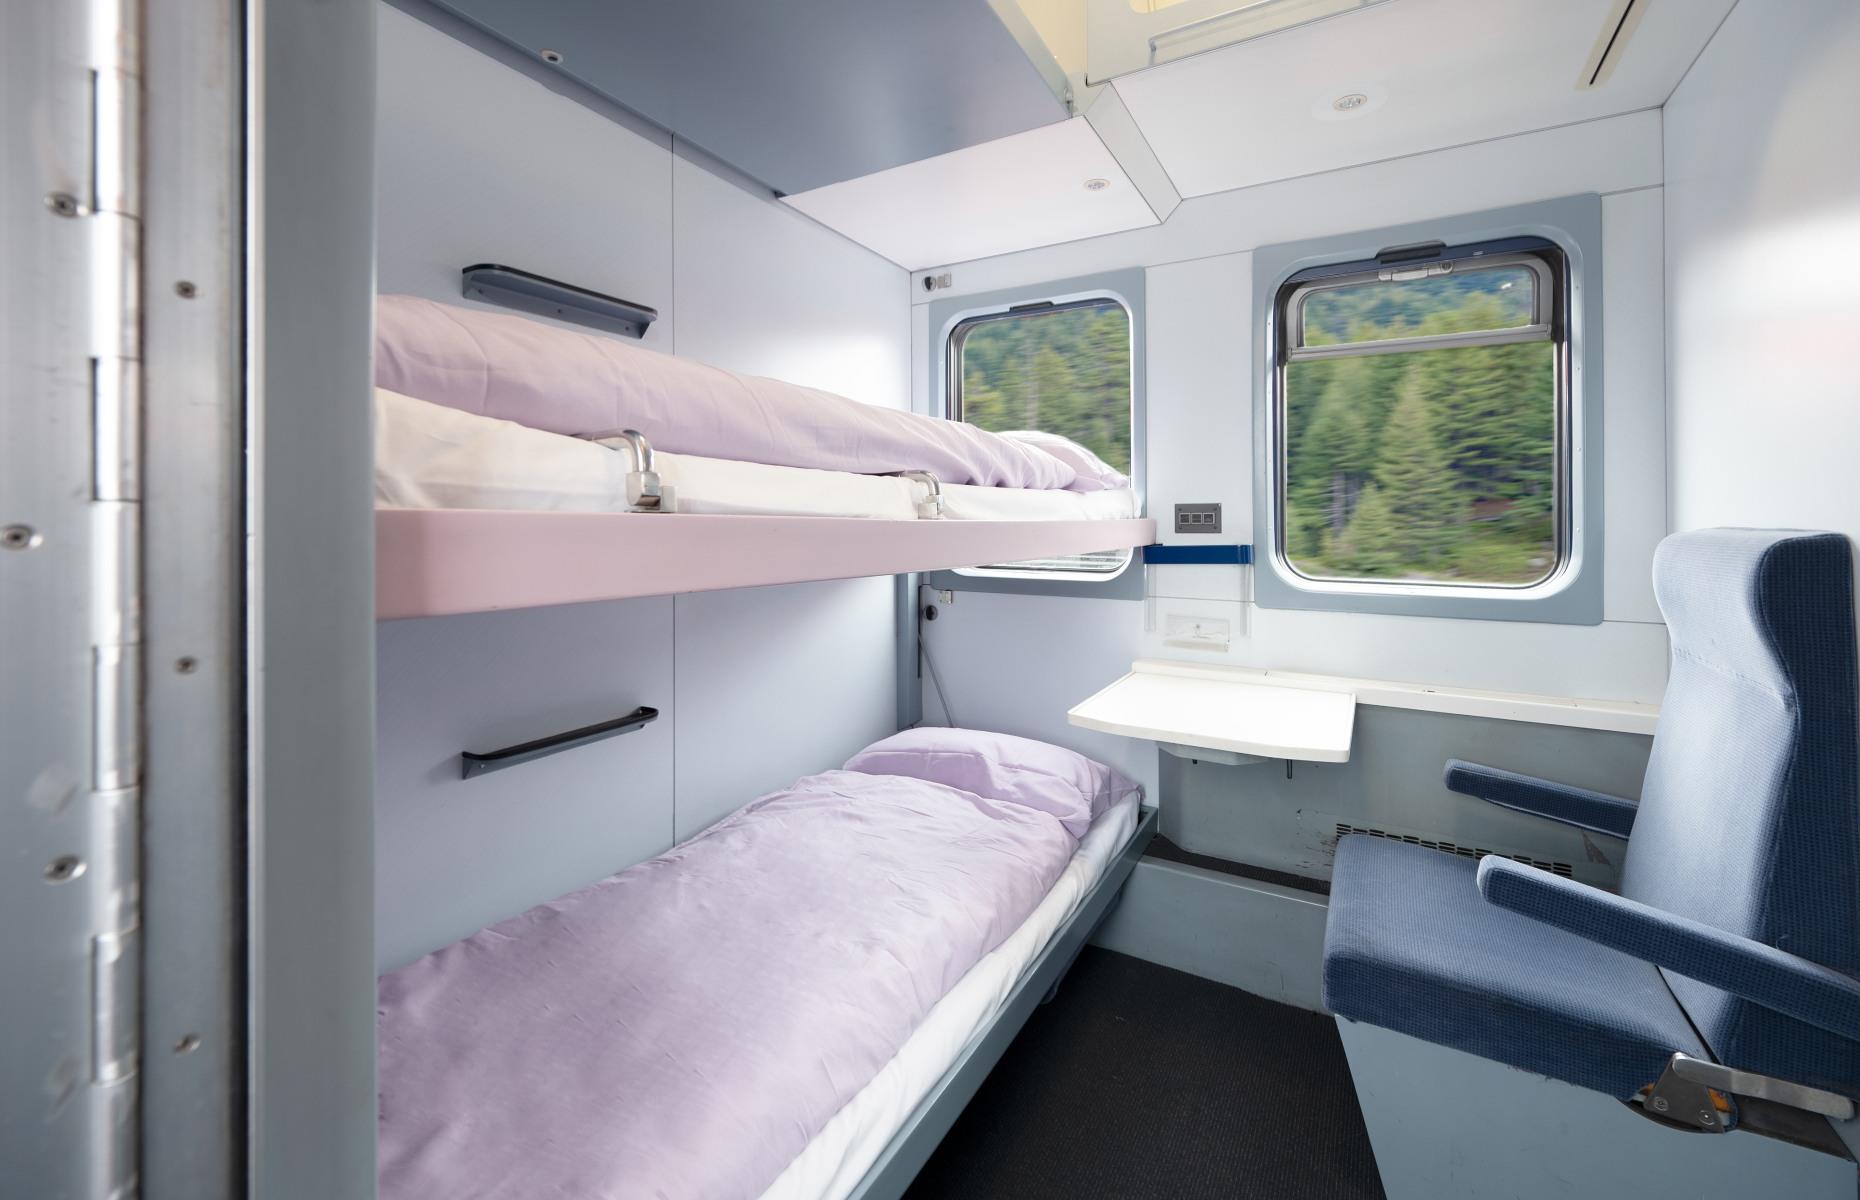 <p>Perhaps the most hotly anticipated launch of 2023 among the backpacking community is the <a href="https://www.europeansleeper.eu/en">European Sleeper</a> service linking the Belgian and Dutch cities of Brussels, Antwerp, Rotterdam and Amsterdam to the German capital. The inaugural journey chugged out of Brussels-Midi station on 25 May, signallng the beginning of the first direct overnight rail route between Brussels and Berlin in more than a decade. Passengers can book three different ticket options according to their budget, from cozy sleeping compartments (pictured) and convertible couchettes to reclining seats.</p>